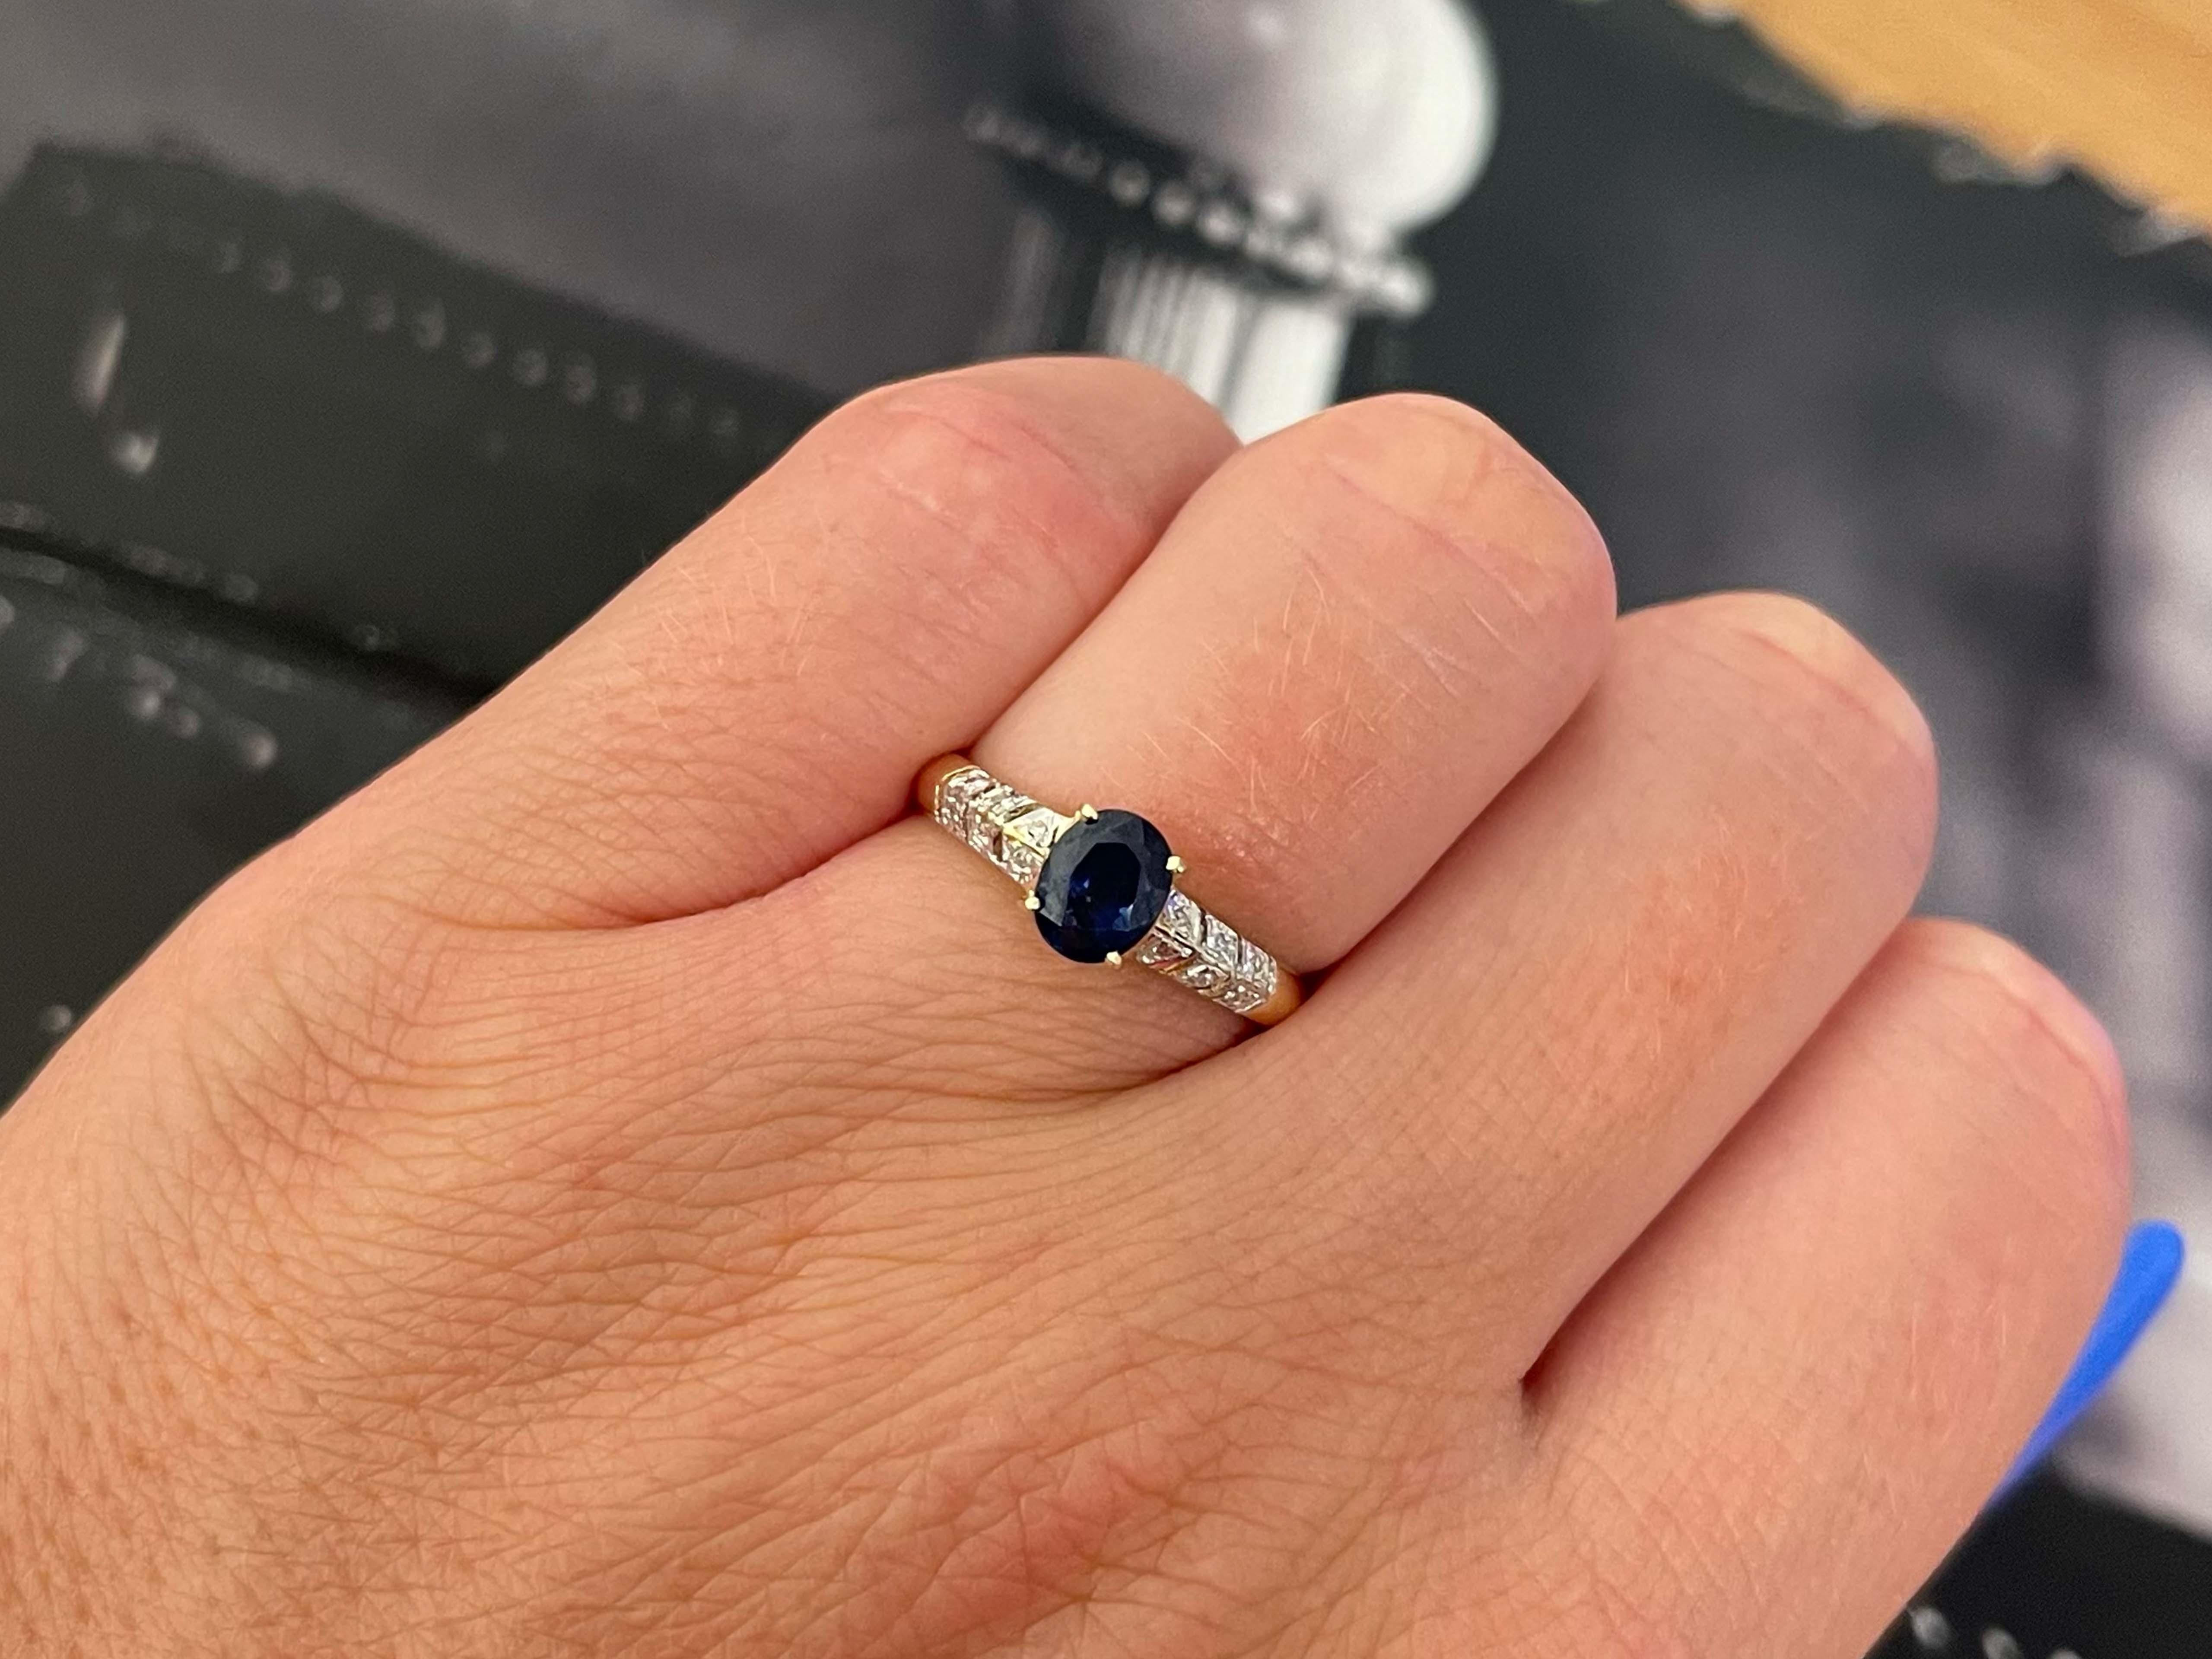 Item Specifications:

Metal: 14K Yellow Gold

Style: Statement Ring

Ring Size: 6.25 (resizing available for a fee)

Total Weight: 1.9 Grams

Ring Height: 6.25 mm

Gemstone Specifications:

Gemstone: 1 blue sapphire

Shape: oval

Sapphire